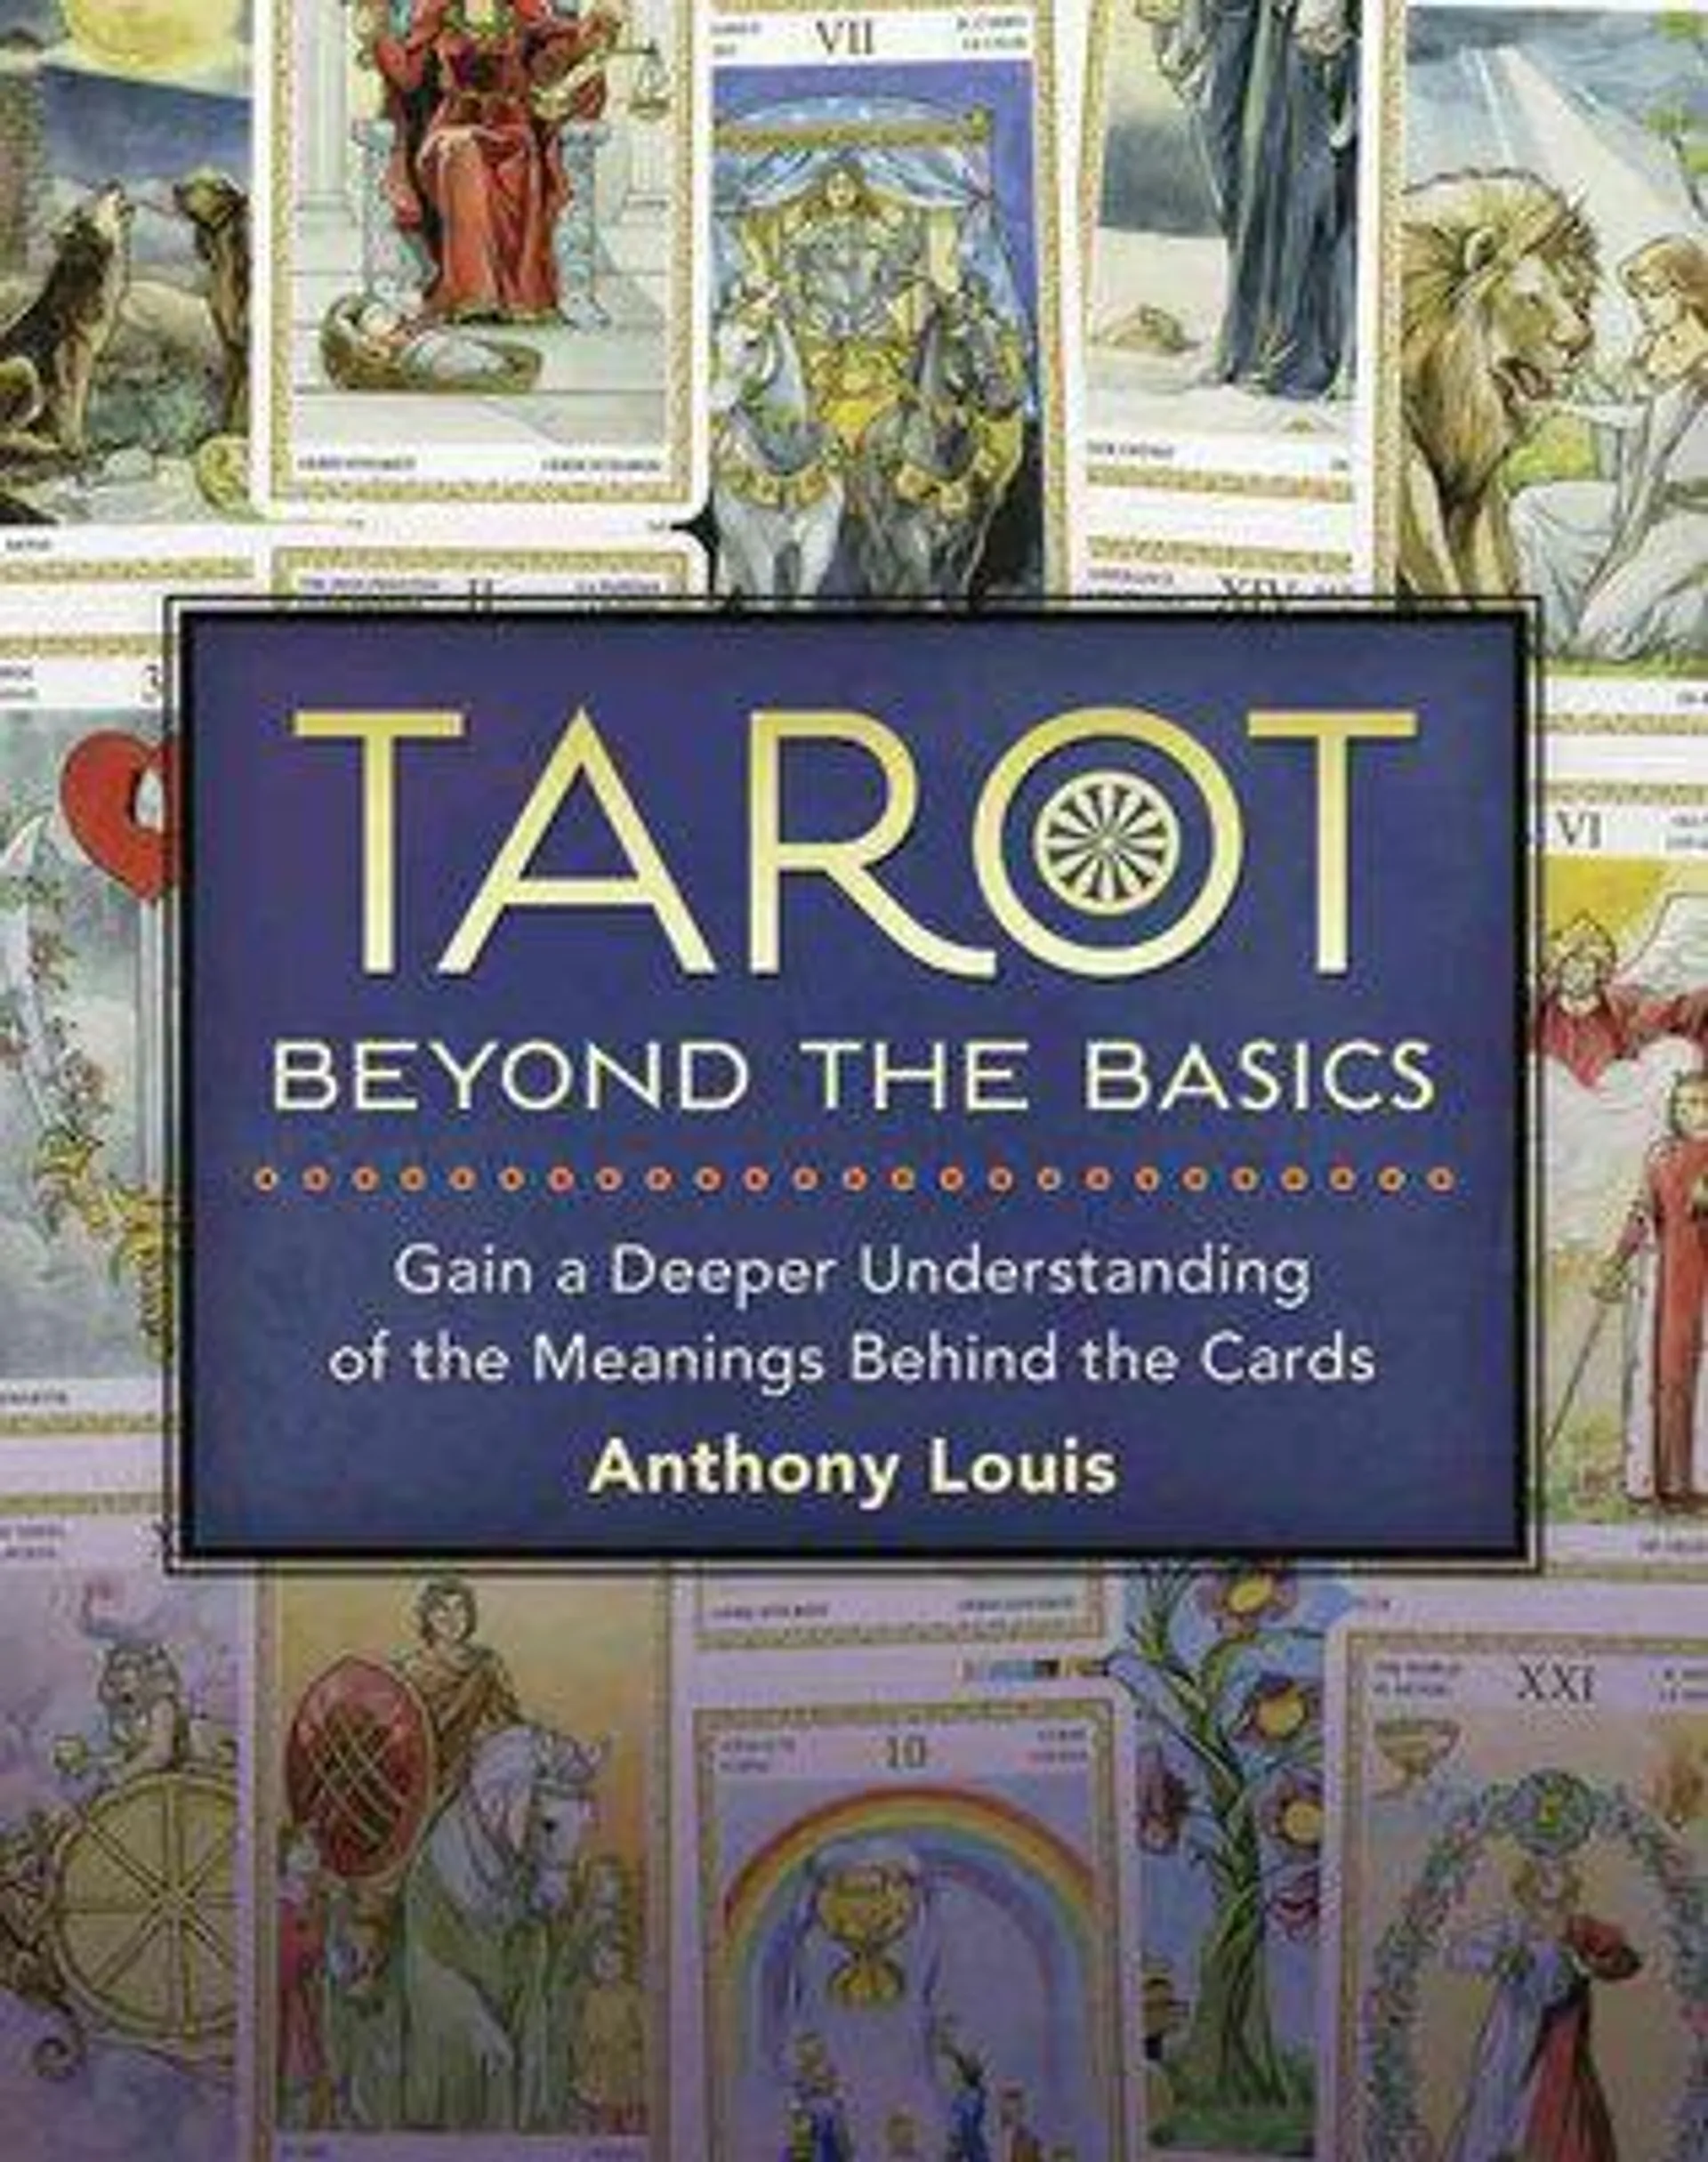 : Gain a Deeper Understanding of the Meanings Behind the Cards